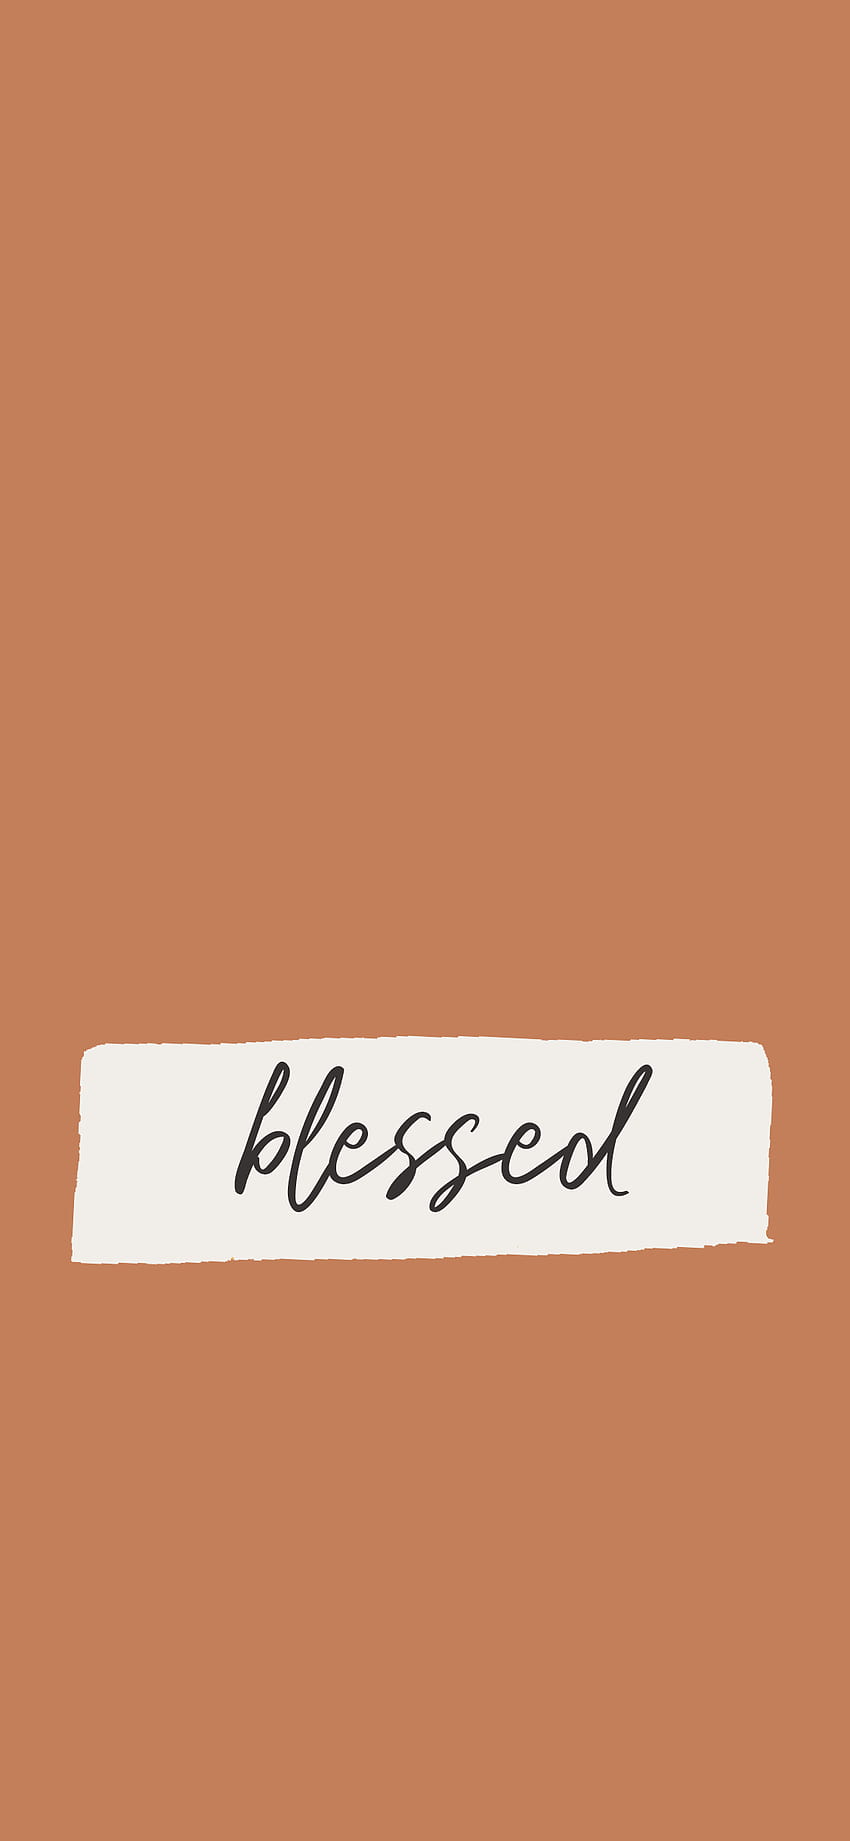 915 Blessed wallpaper by Paya915  Download on ZEDGE  4855